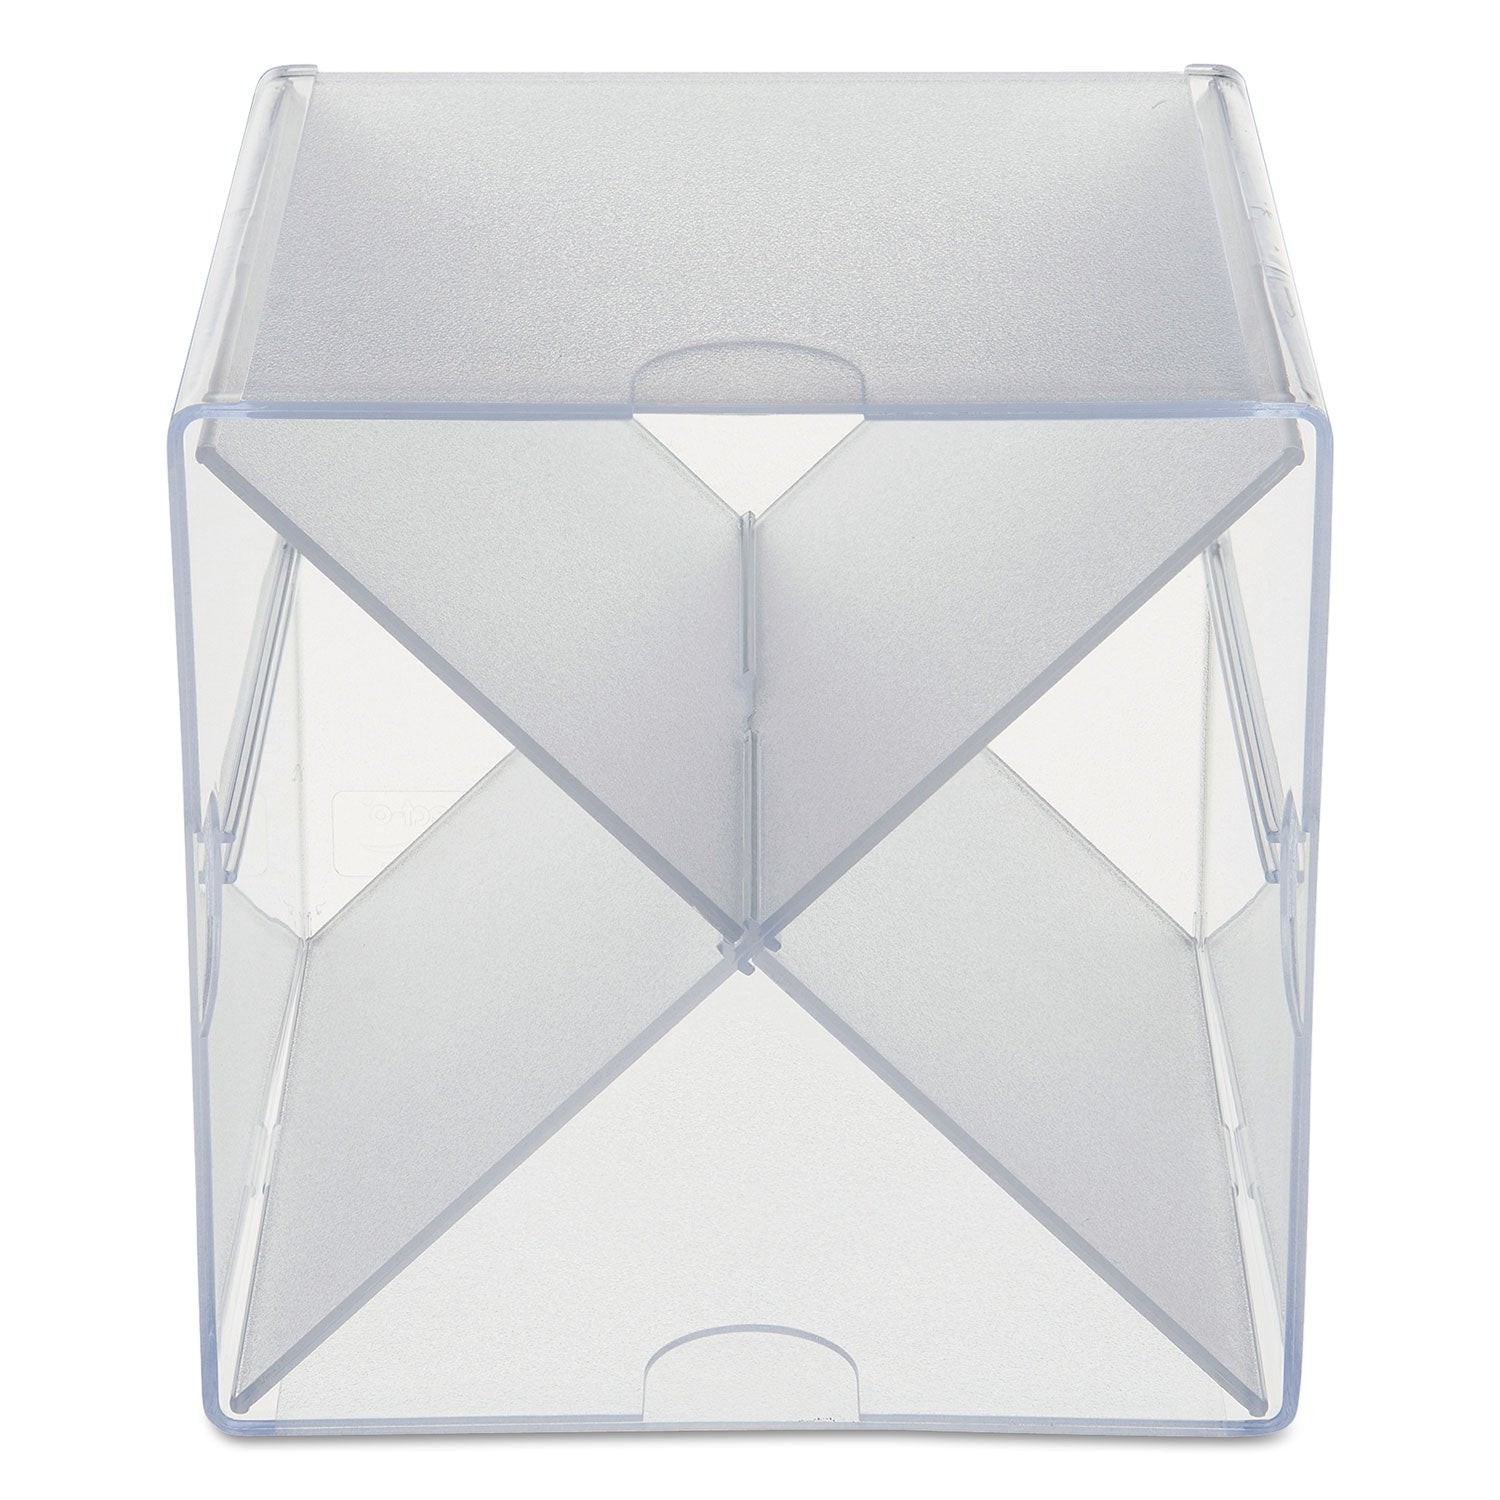 Stackable Cube Organizer, X Divider, 4 Compartments, Plastic, 6 x 7.2 x 6, Clear - 